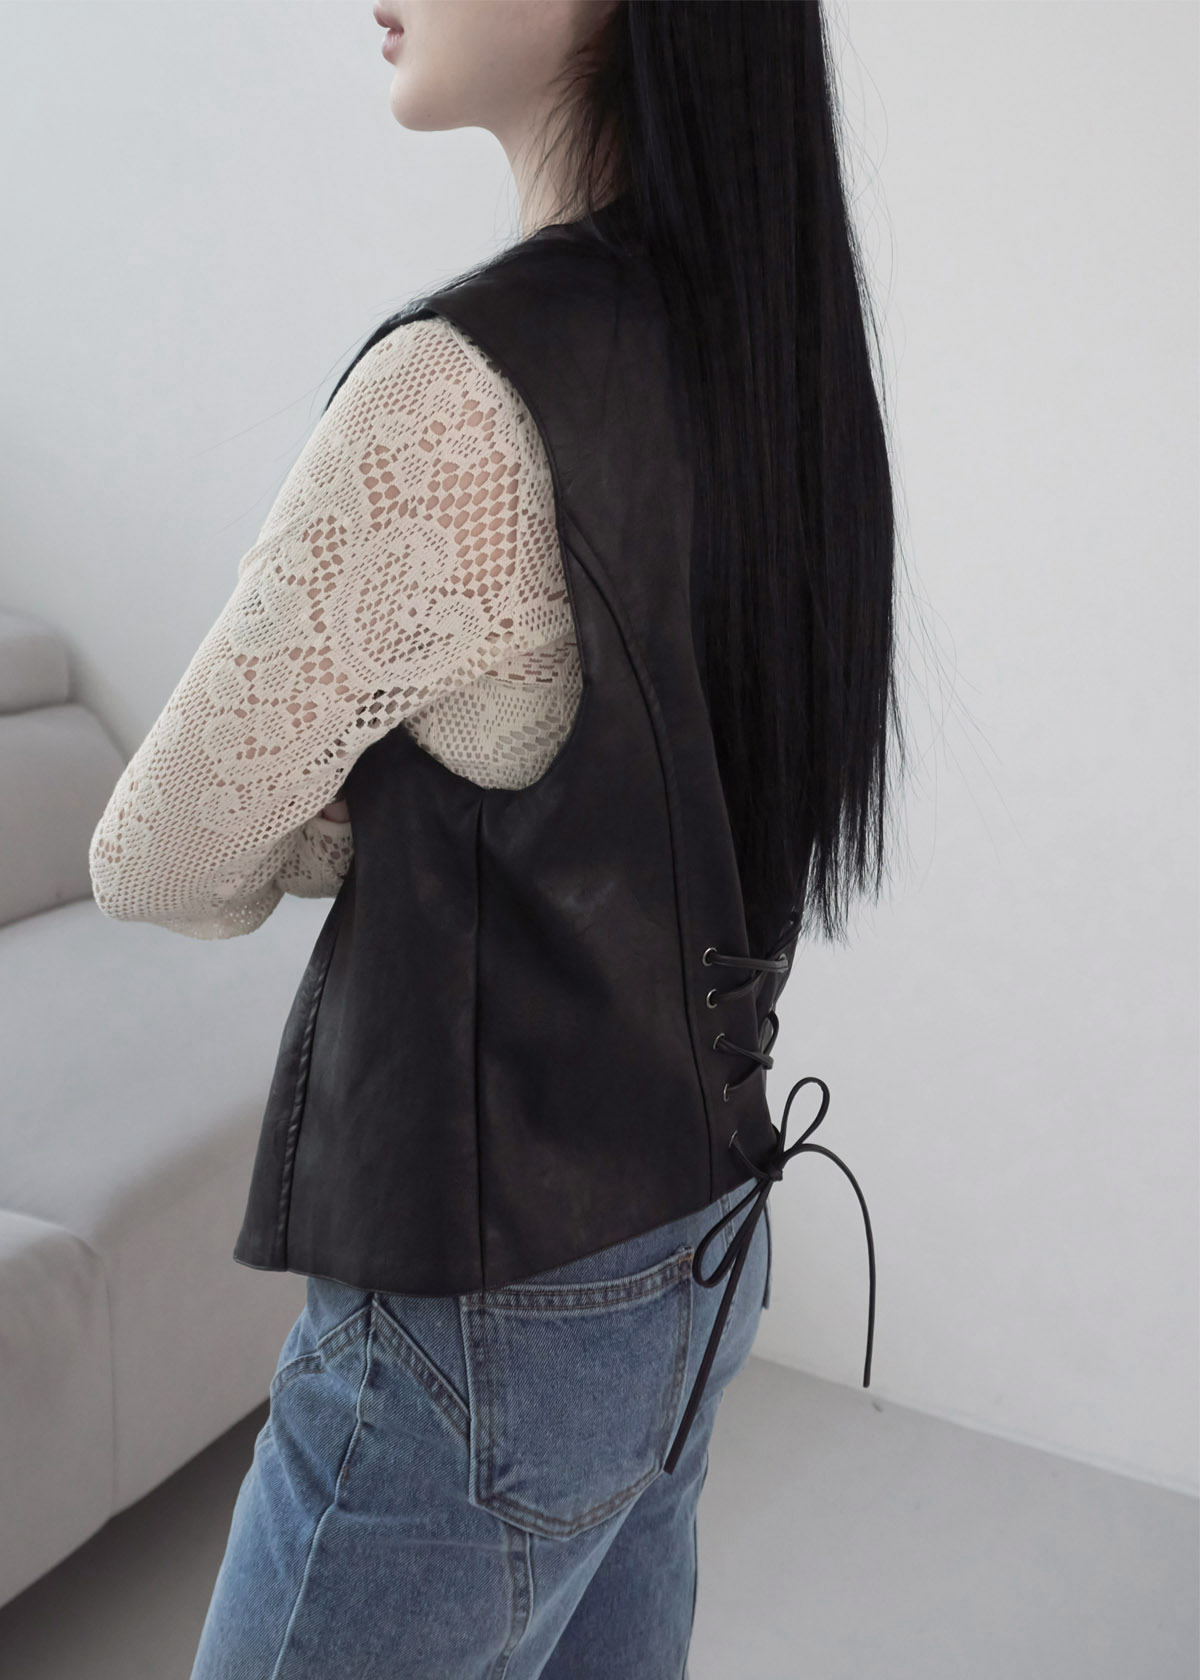 Lace up Over Leather Vest